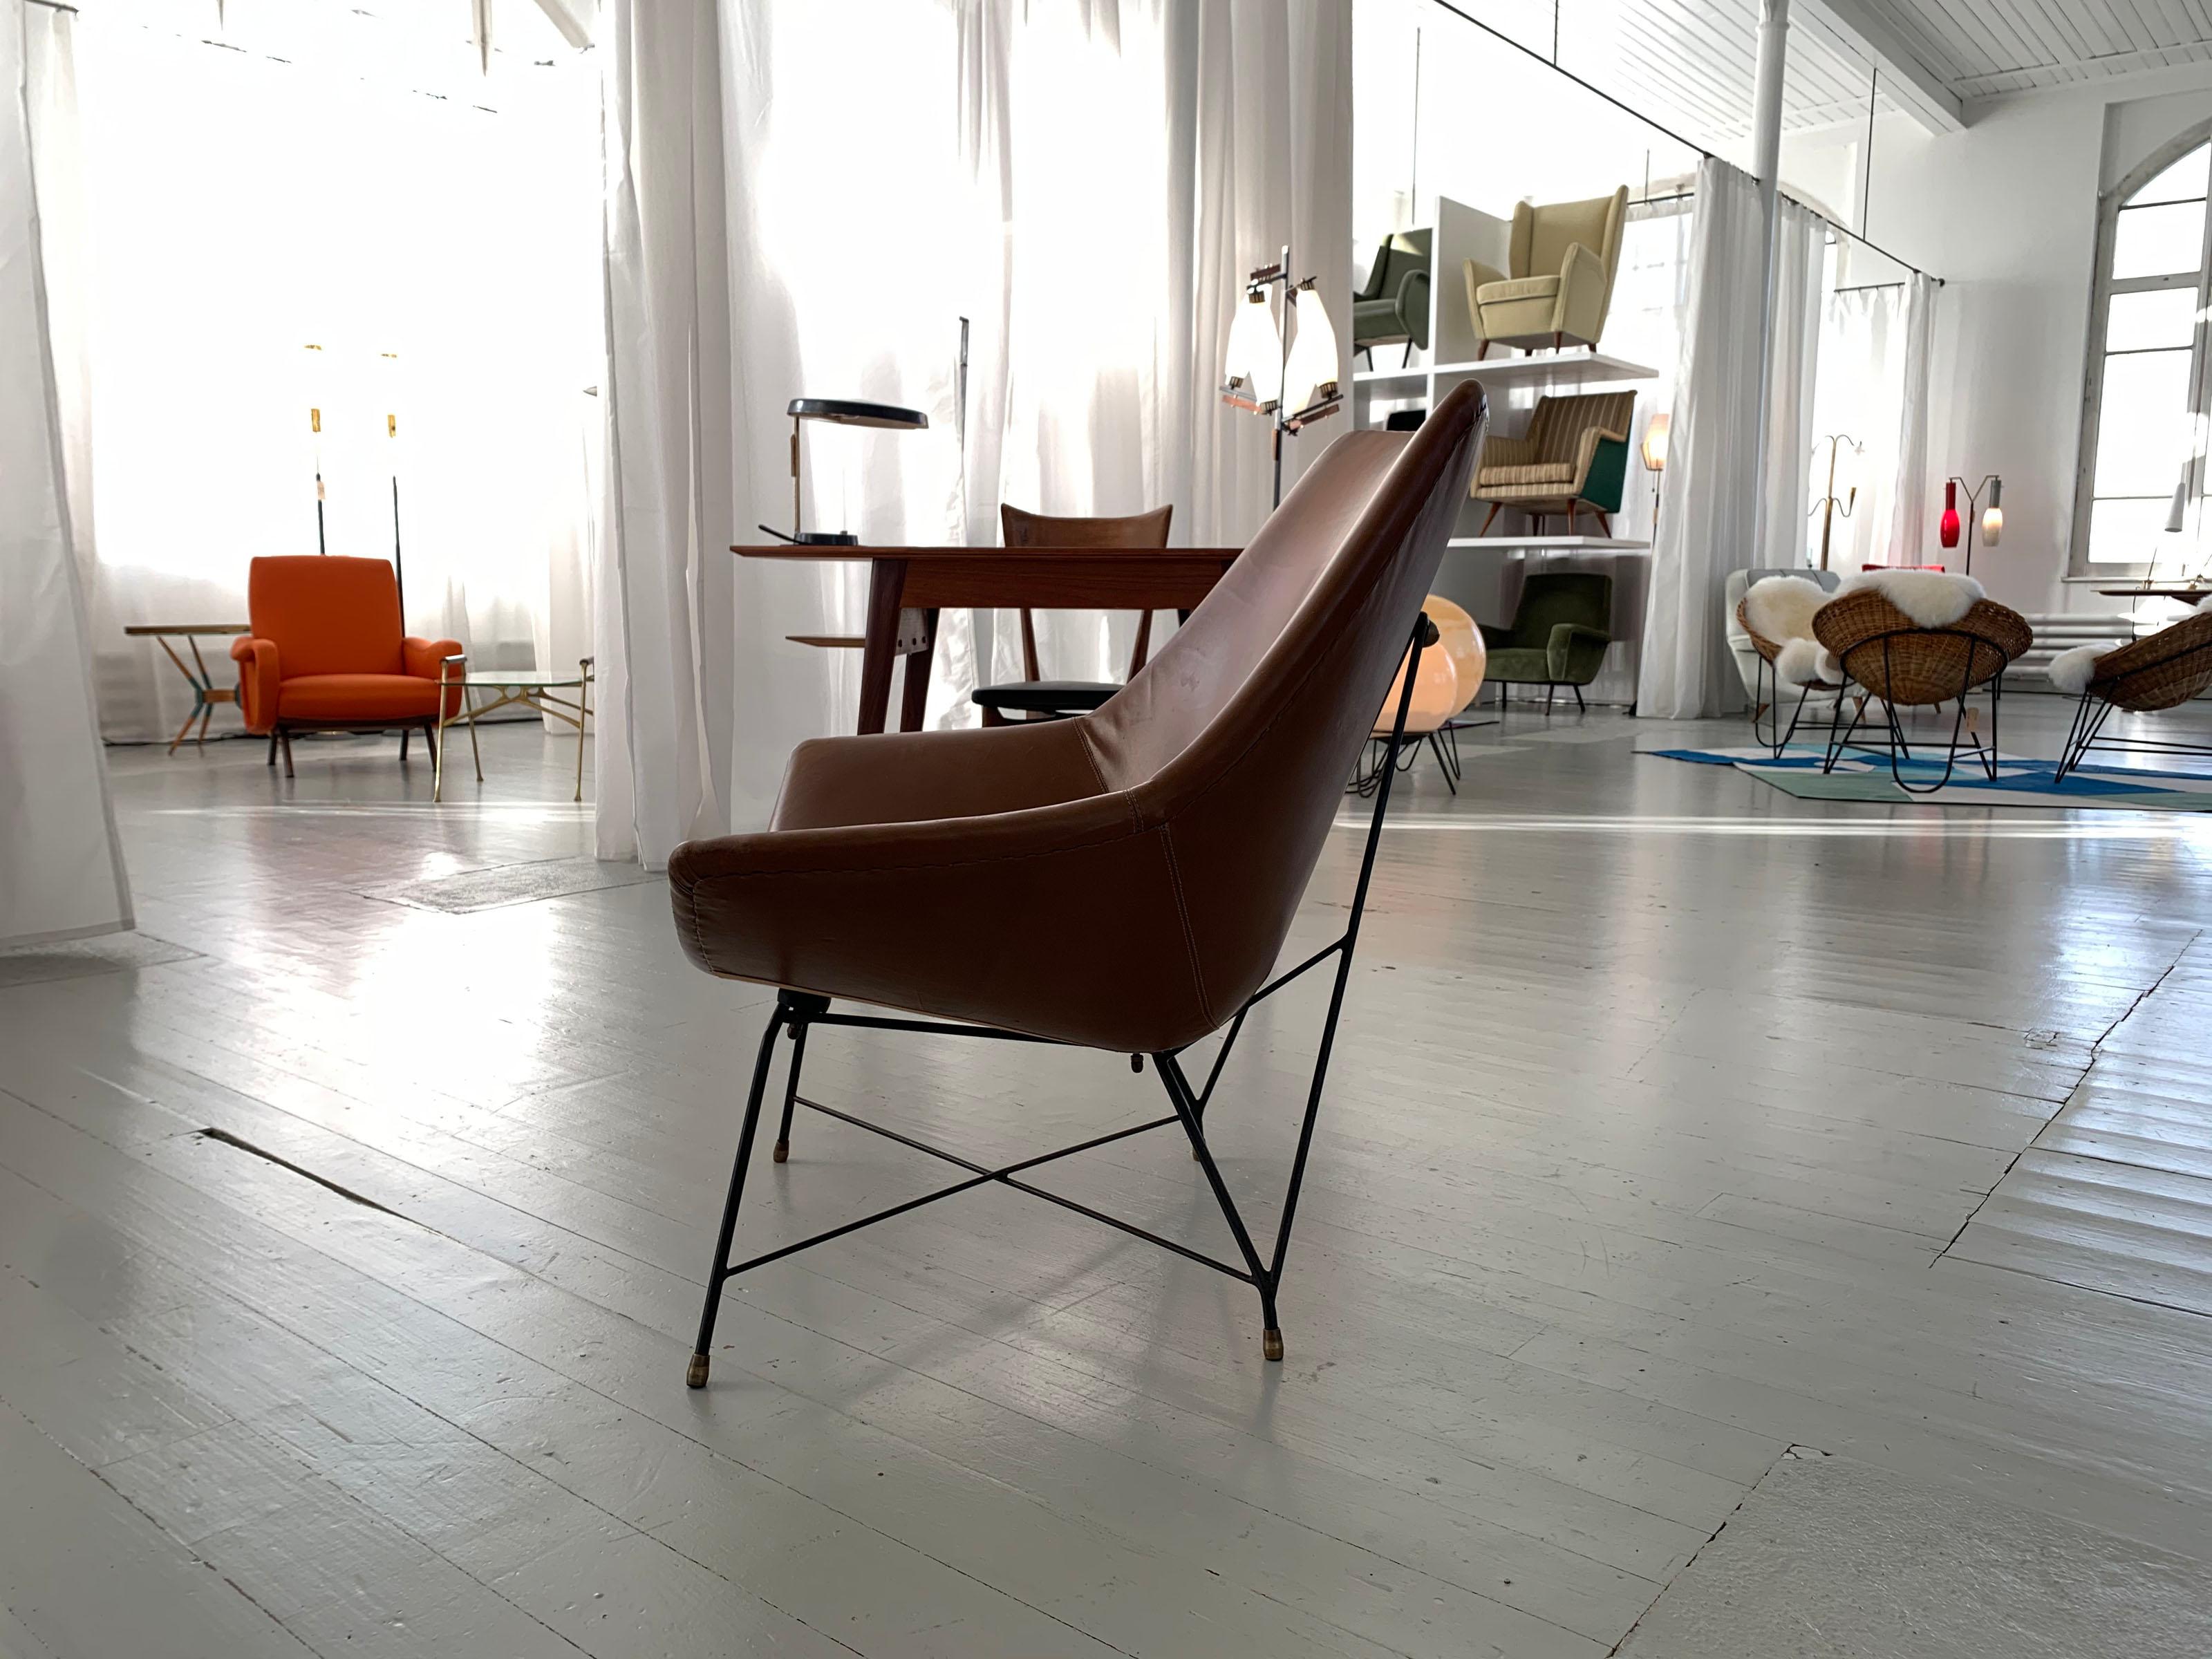 Italian Brown Leather Kosmos Chair Design by Augusto Bozzi for Saporiti, 1954 For Sale 5